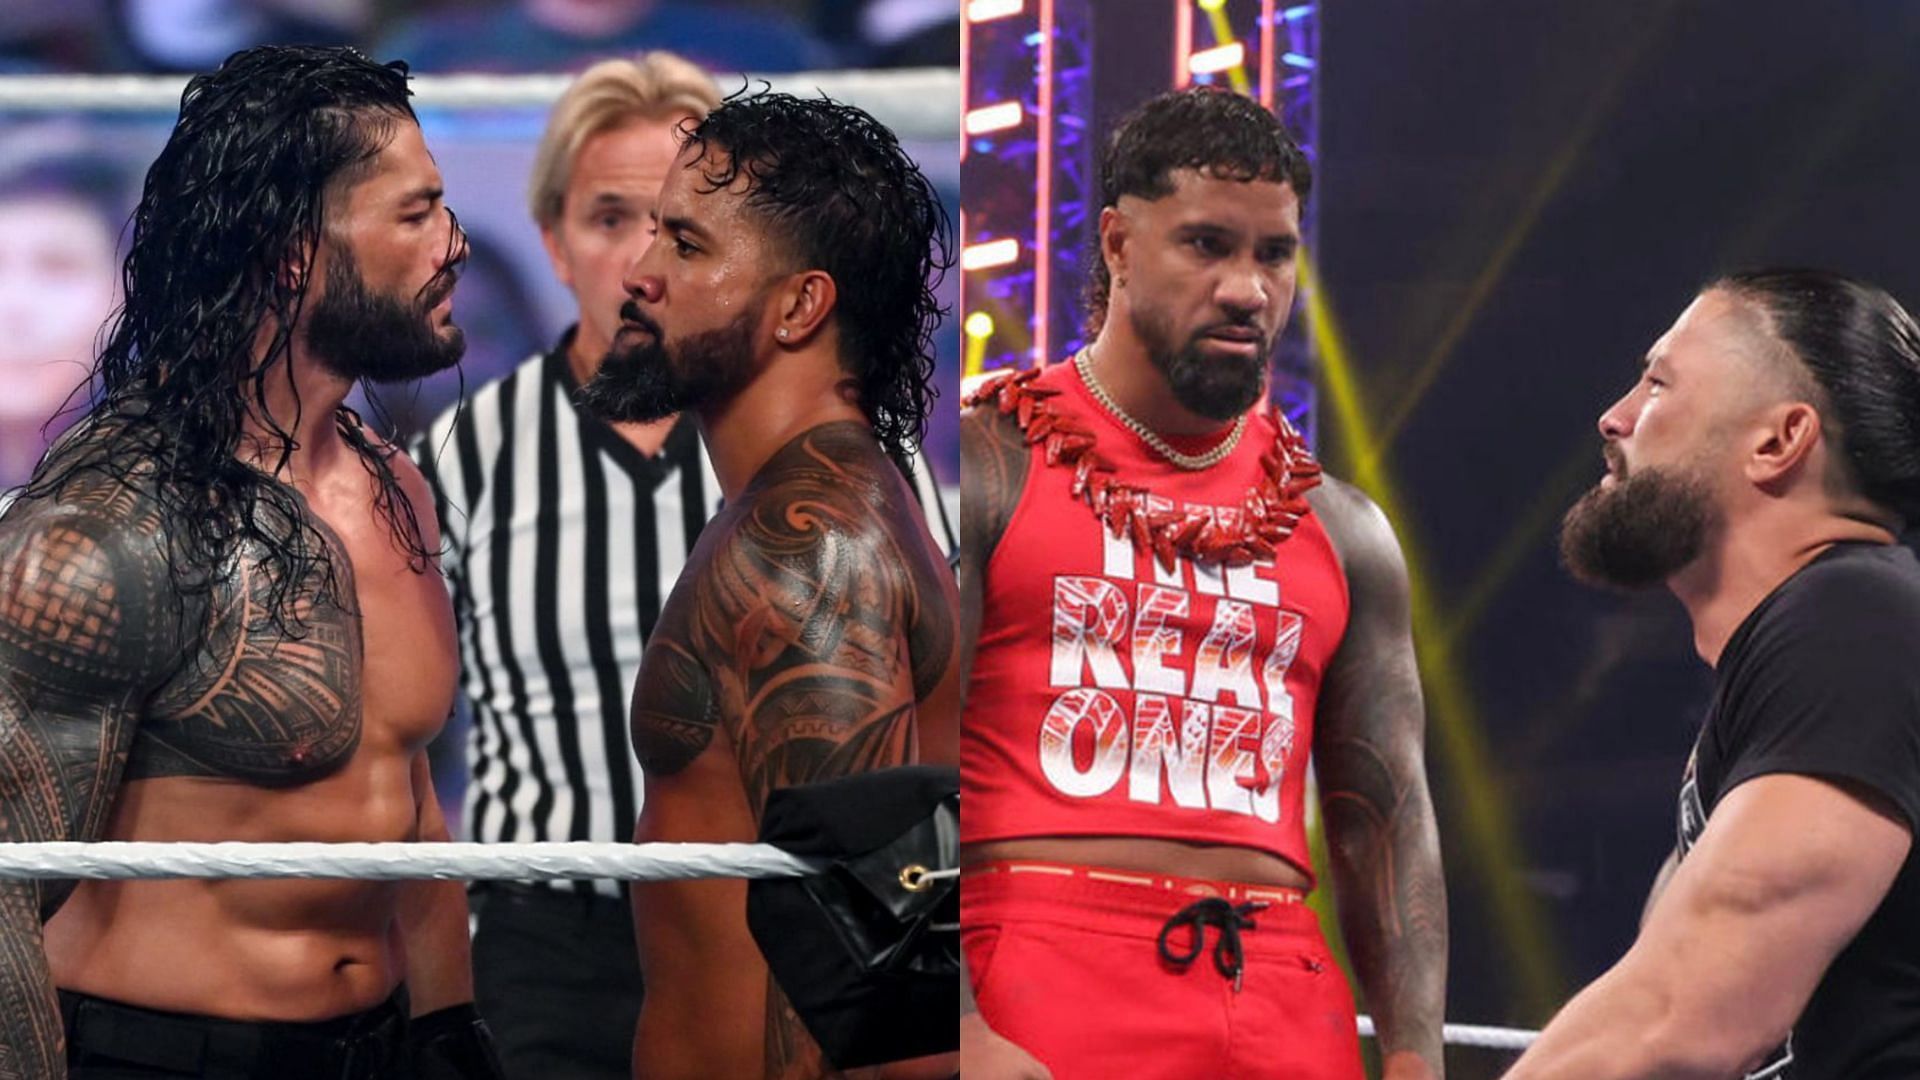 Roman Reigns will face Jey Uso at SummerSlam